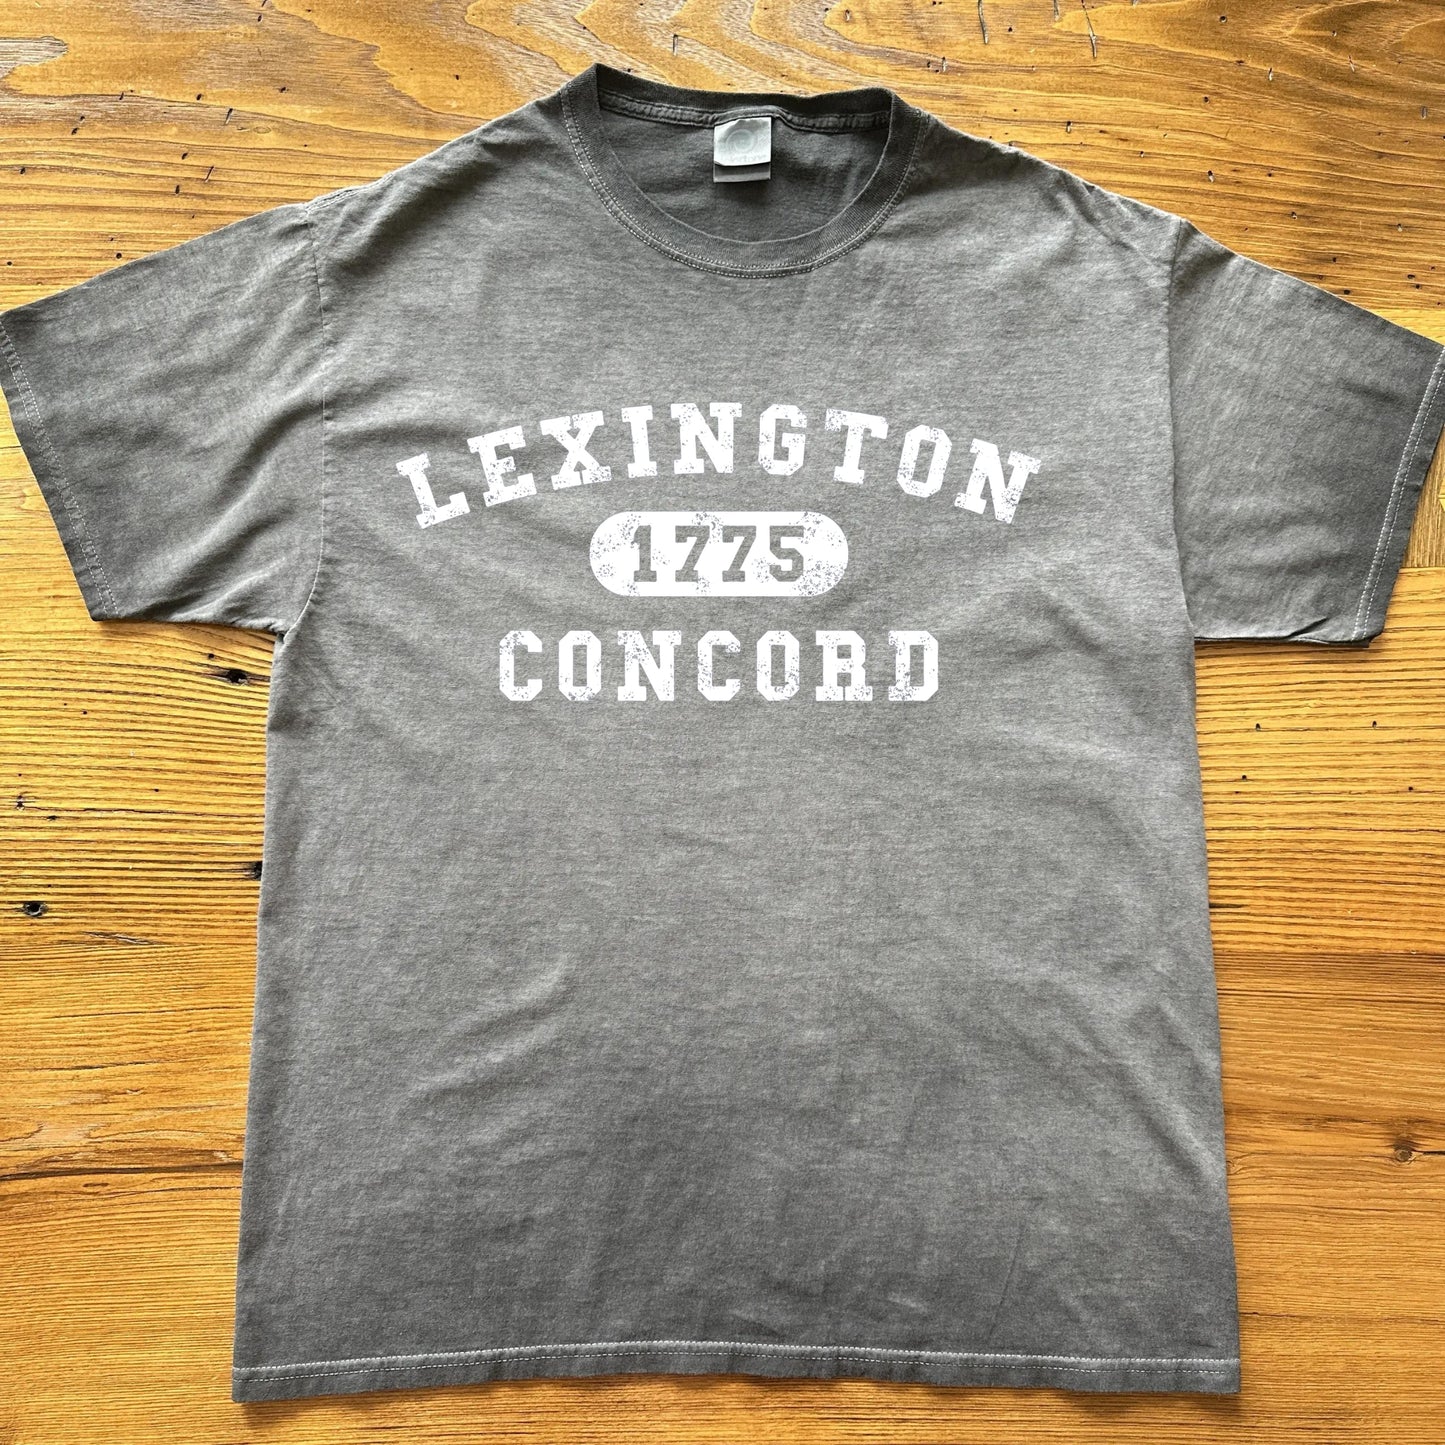 Vintage black of the 1775 Lexington and Concord Shirt from The History List store